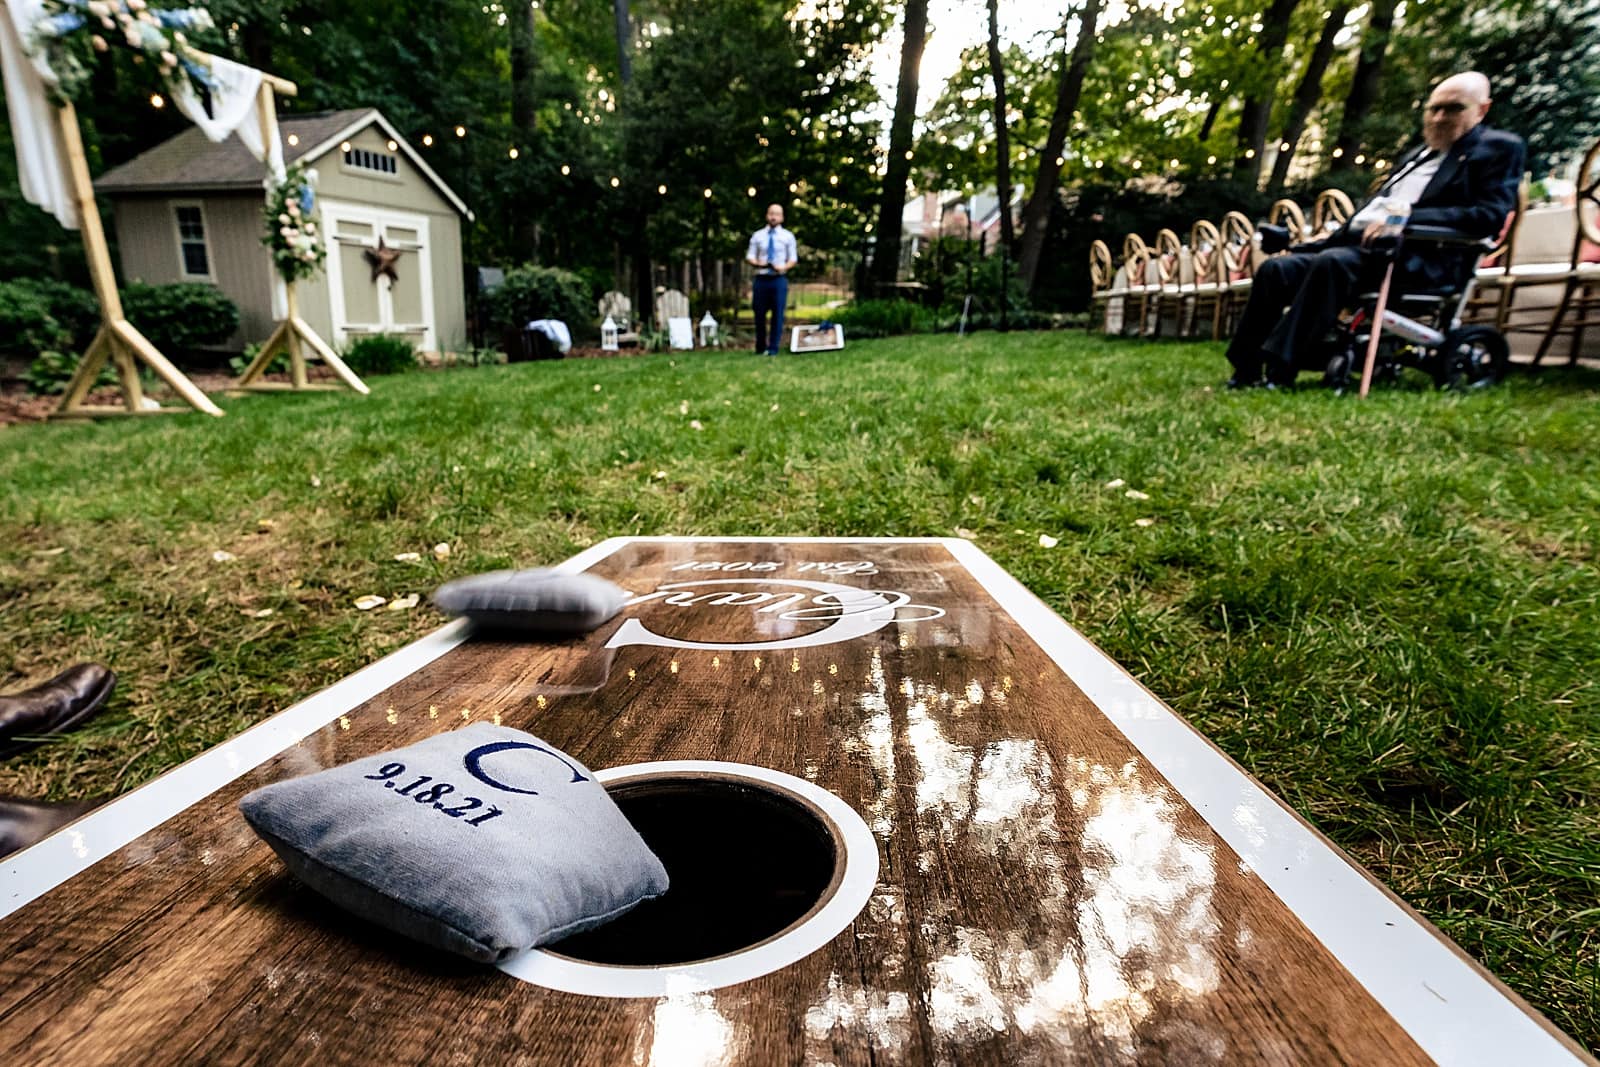 Yard games are a must for a DIY wedding in the backyard